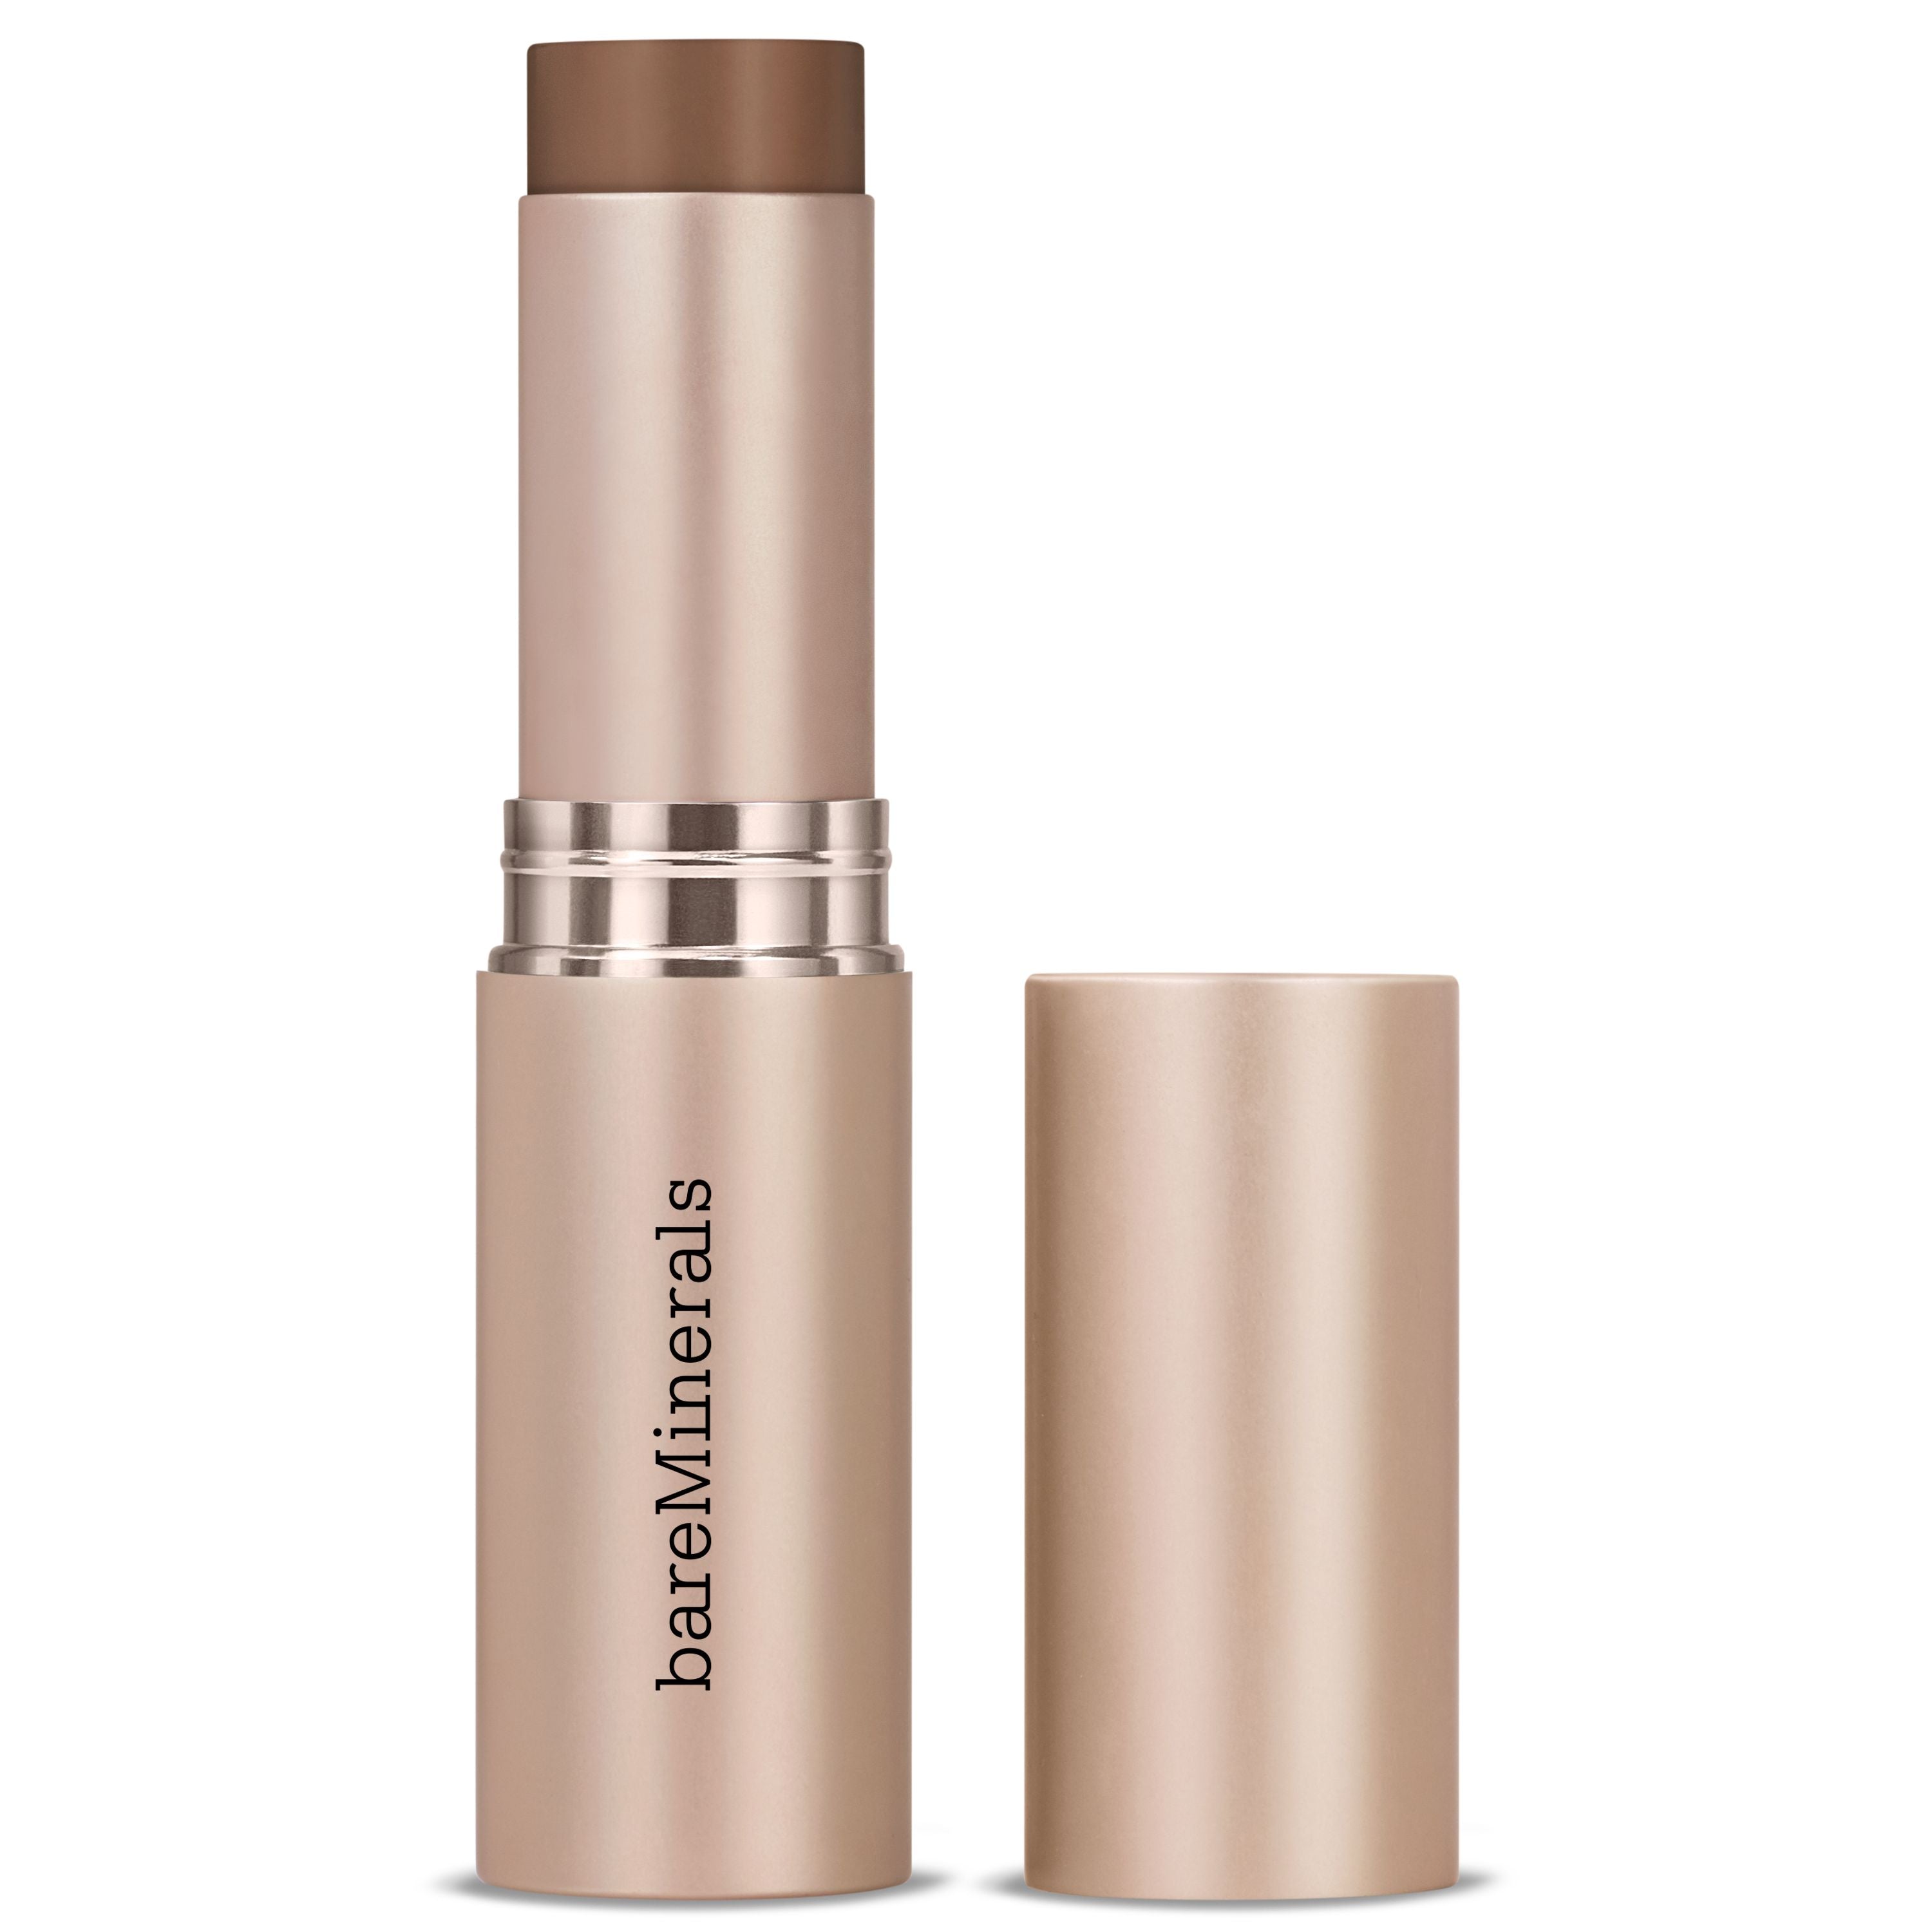 RESCUE® COMPLEXION Hydrating Foundation